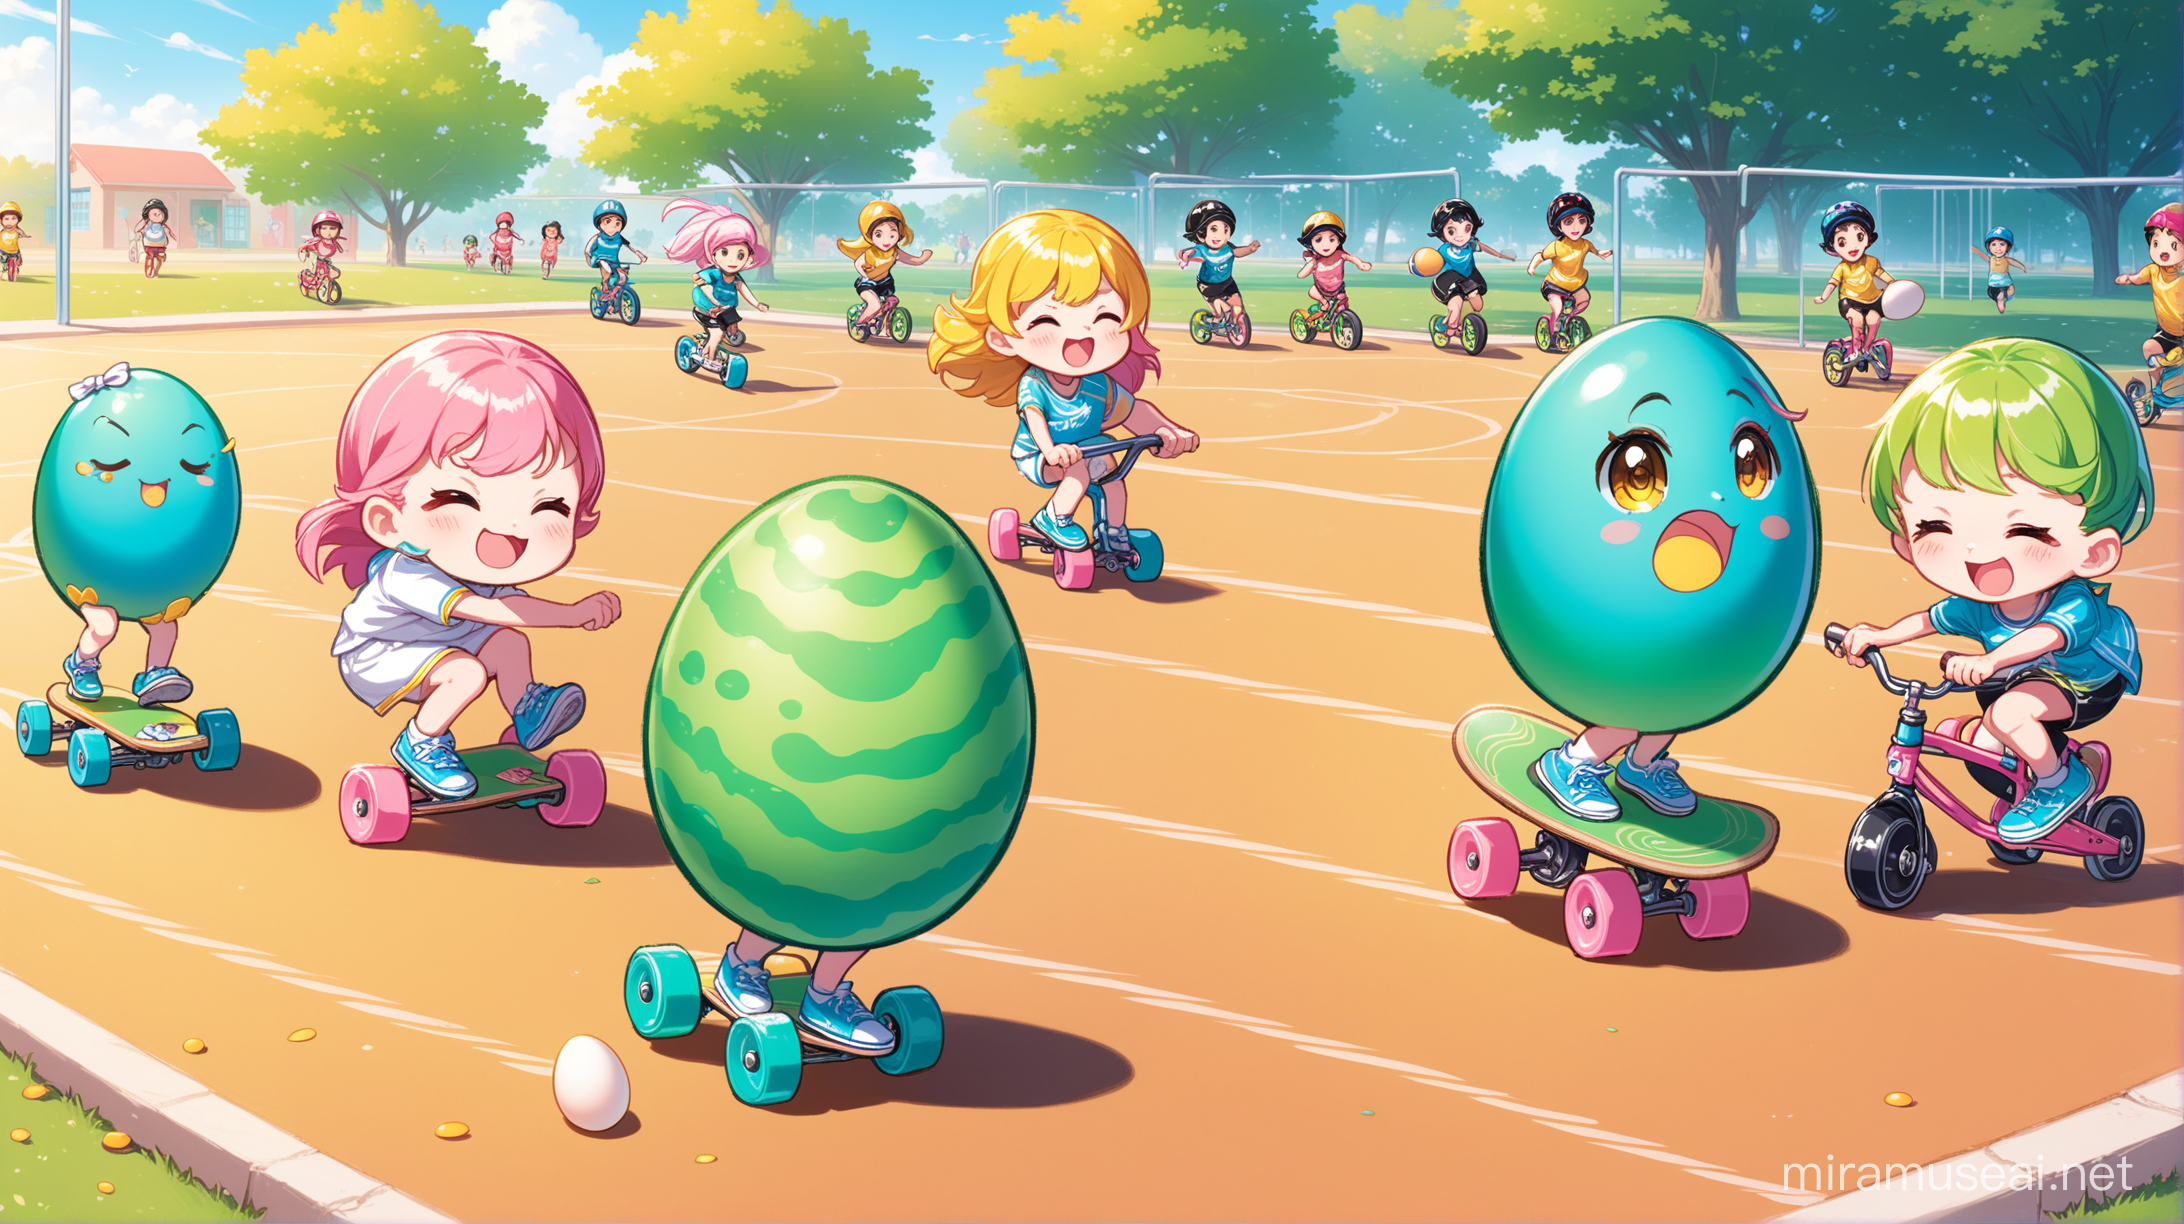 Colorful Egg Pies Enjoy Sports Day Bicycles Skateboards and Sunshine Fun